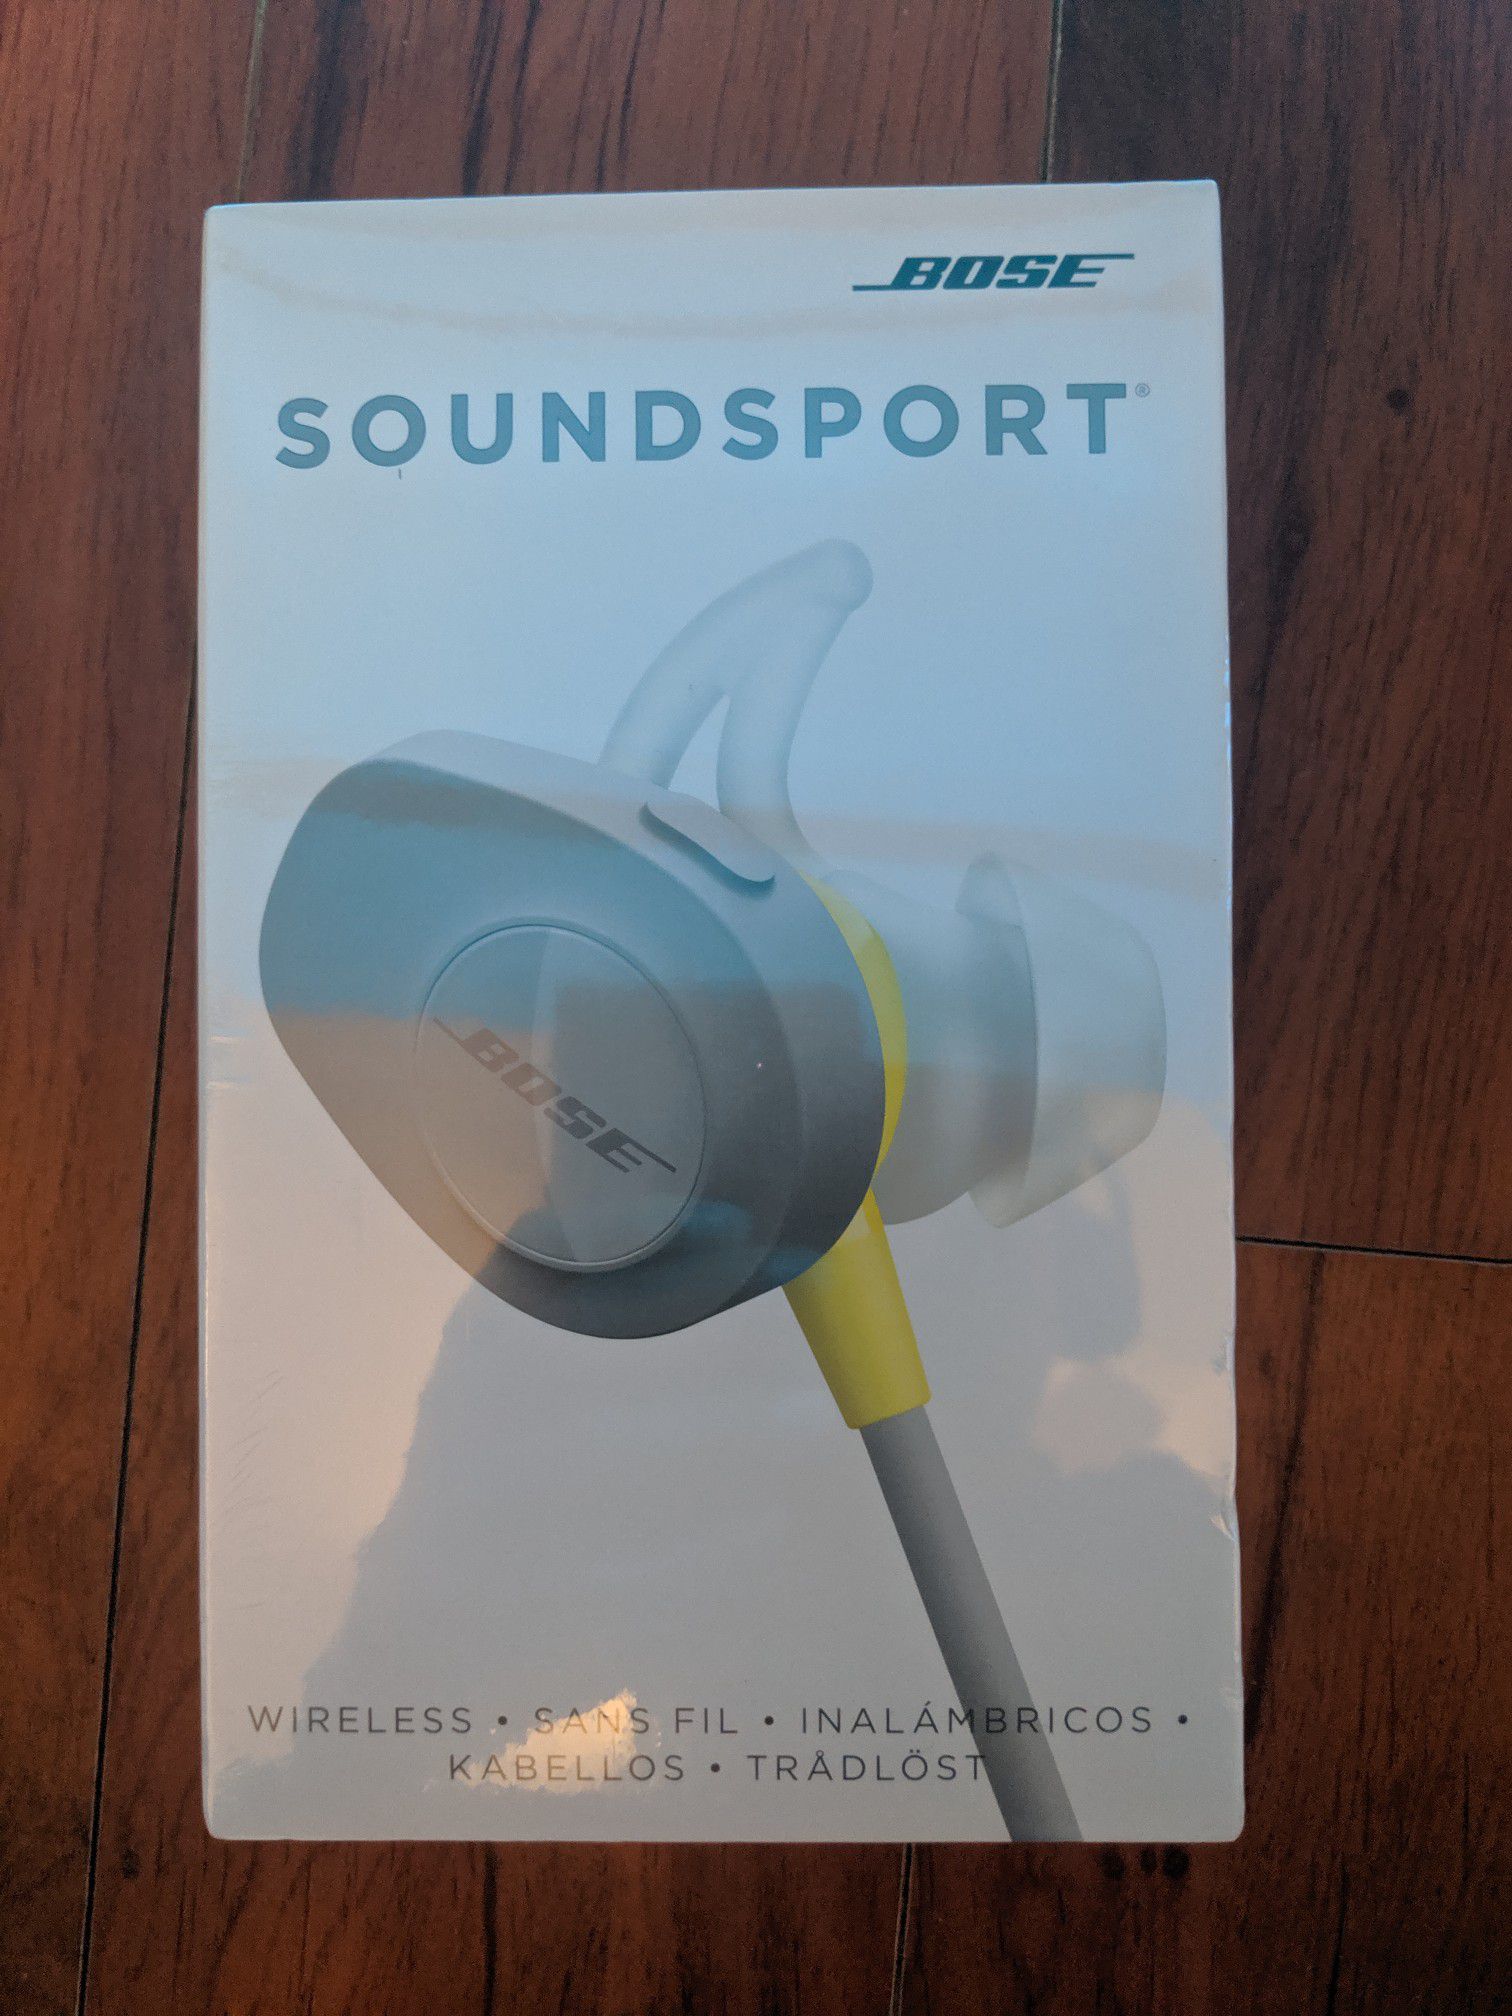 Brand New Bose SoundSport, Wireless Earbuds, (Sweatproof Bluetooth Headphones for Running and Sports), Citrus (Yellow) Never Used or Opened